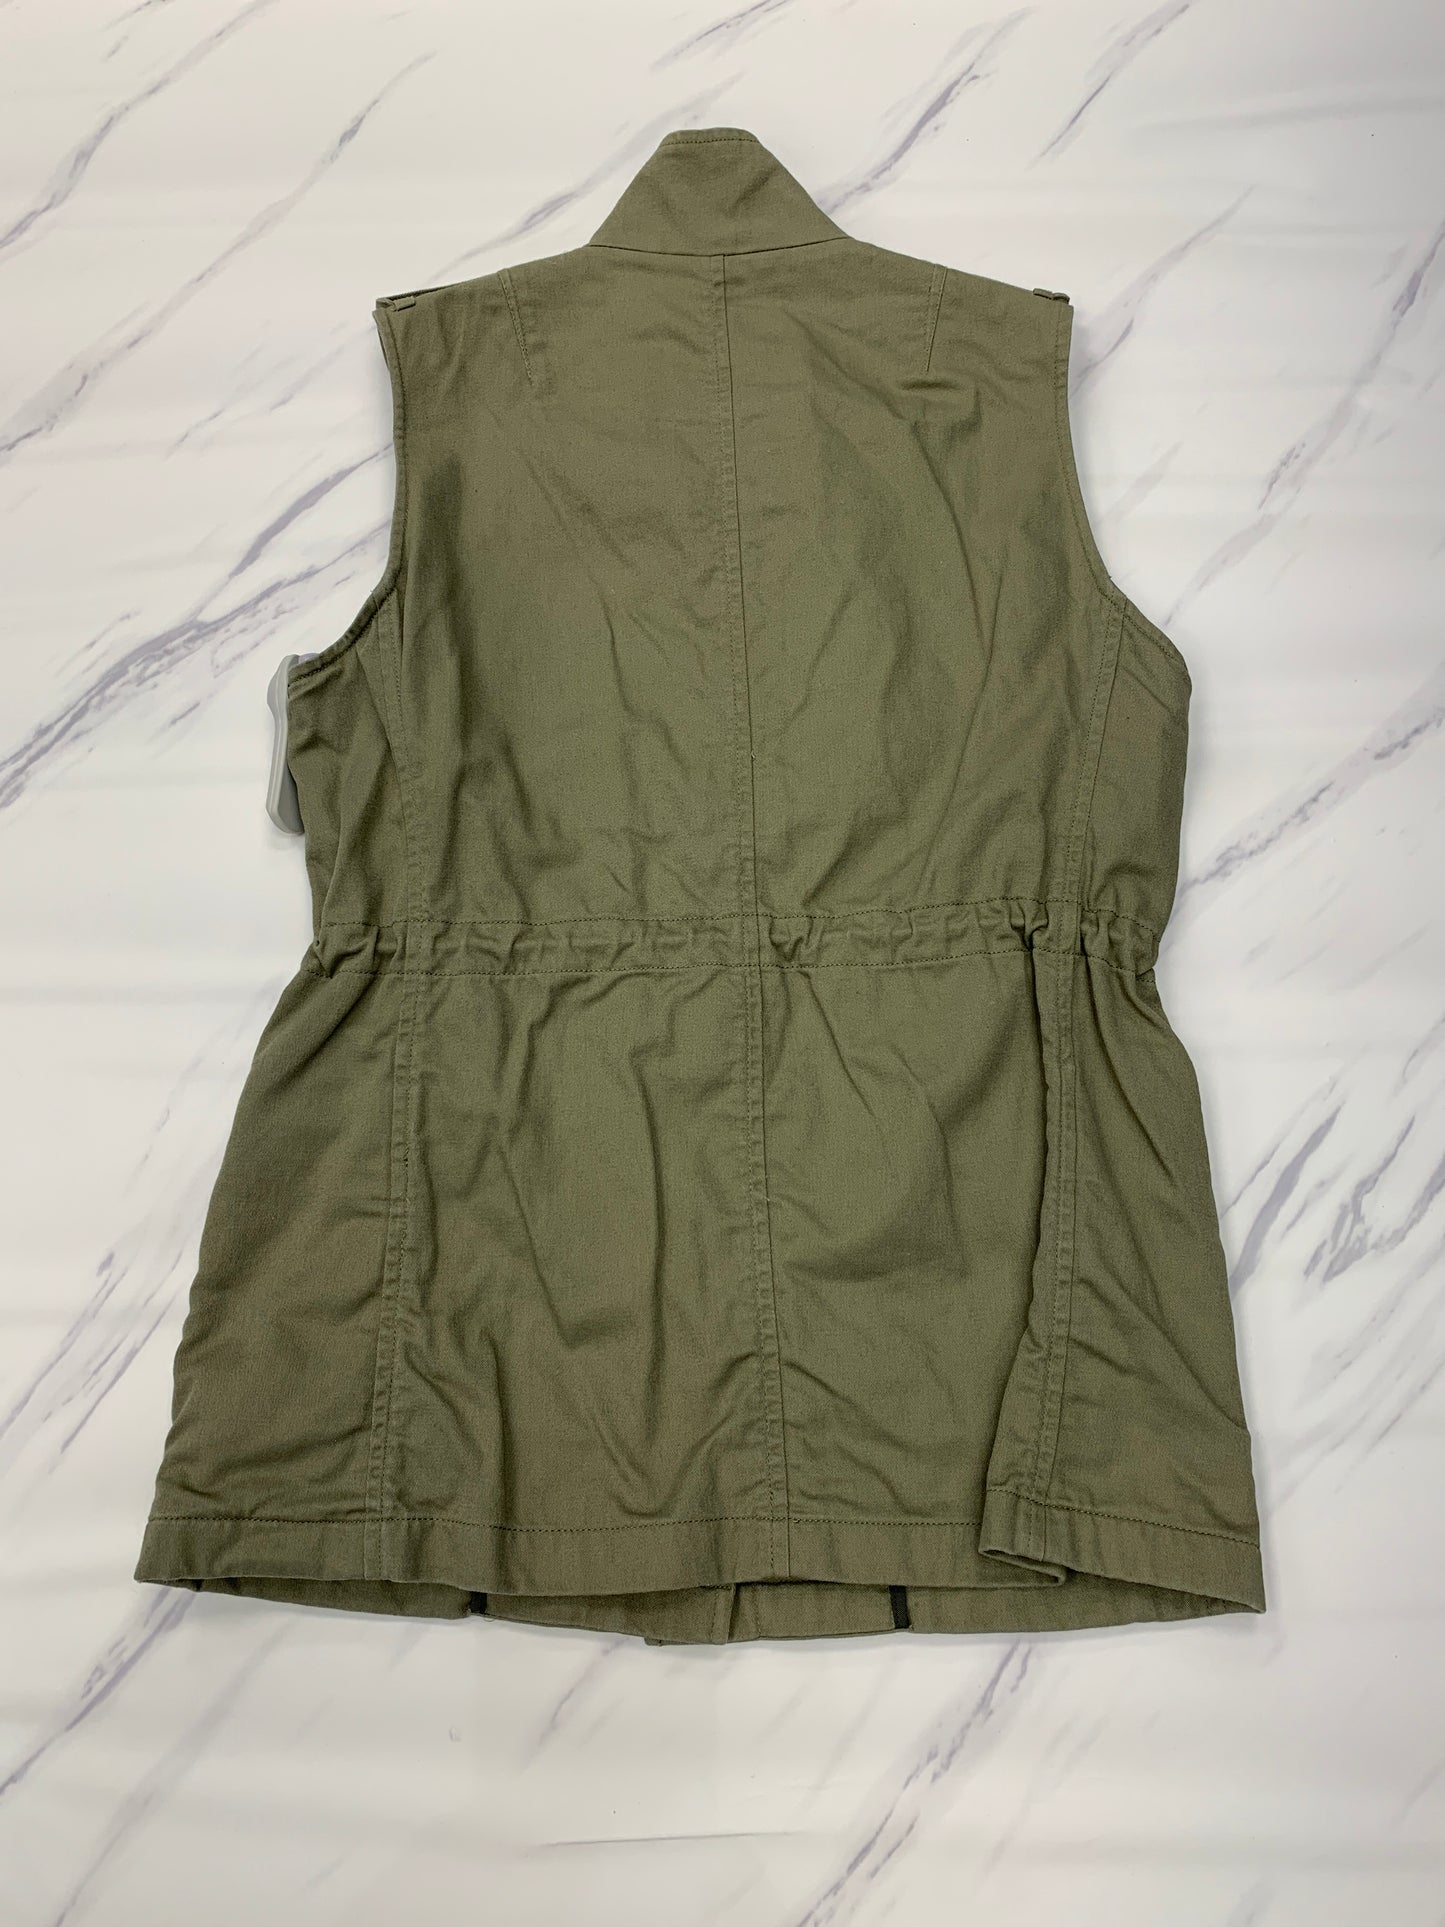 Vest Other By Rag And Bone  Size: M